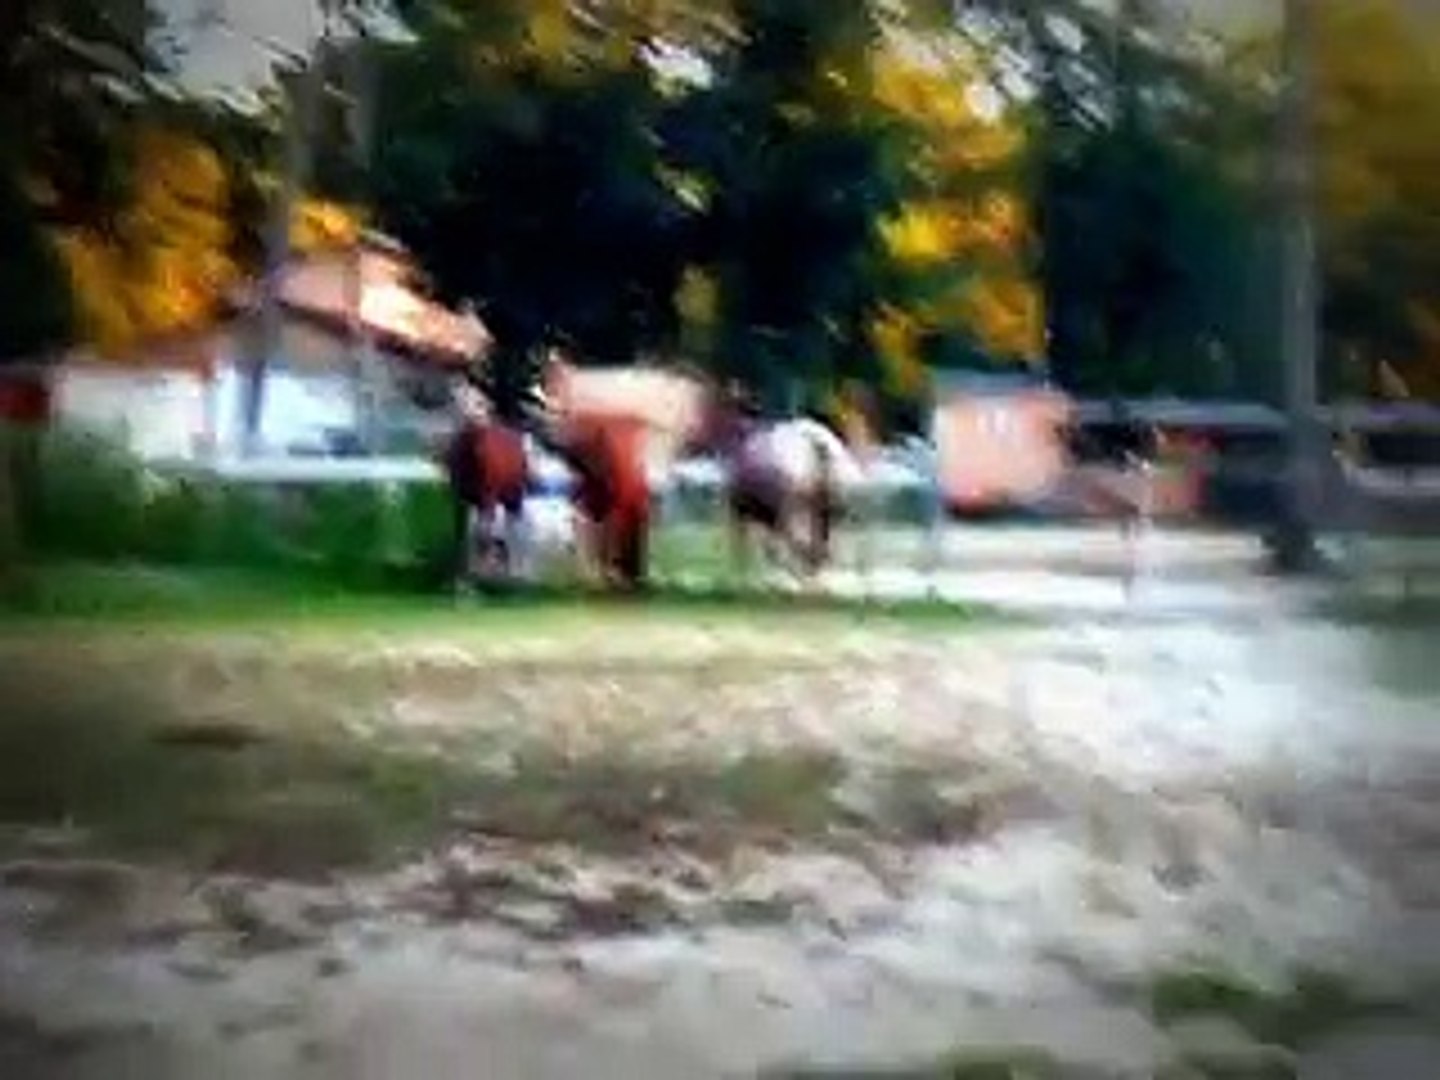 Colombian Horse Sex - Horses First Time Meeting Jack the Donkey!! Must See For Animal/Horse Lovers